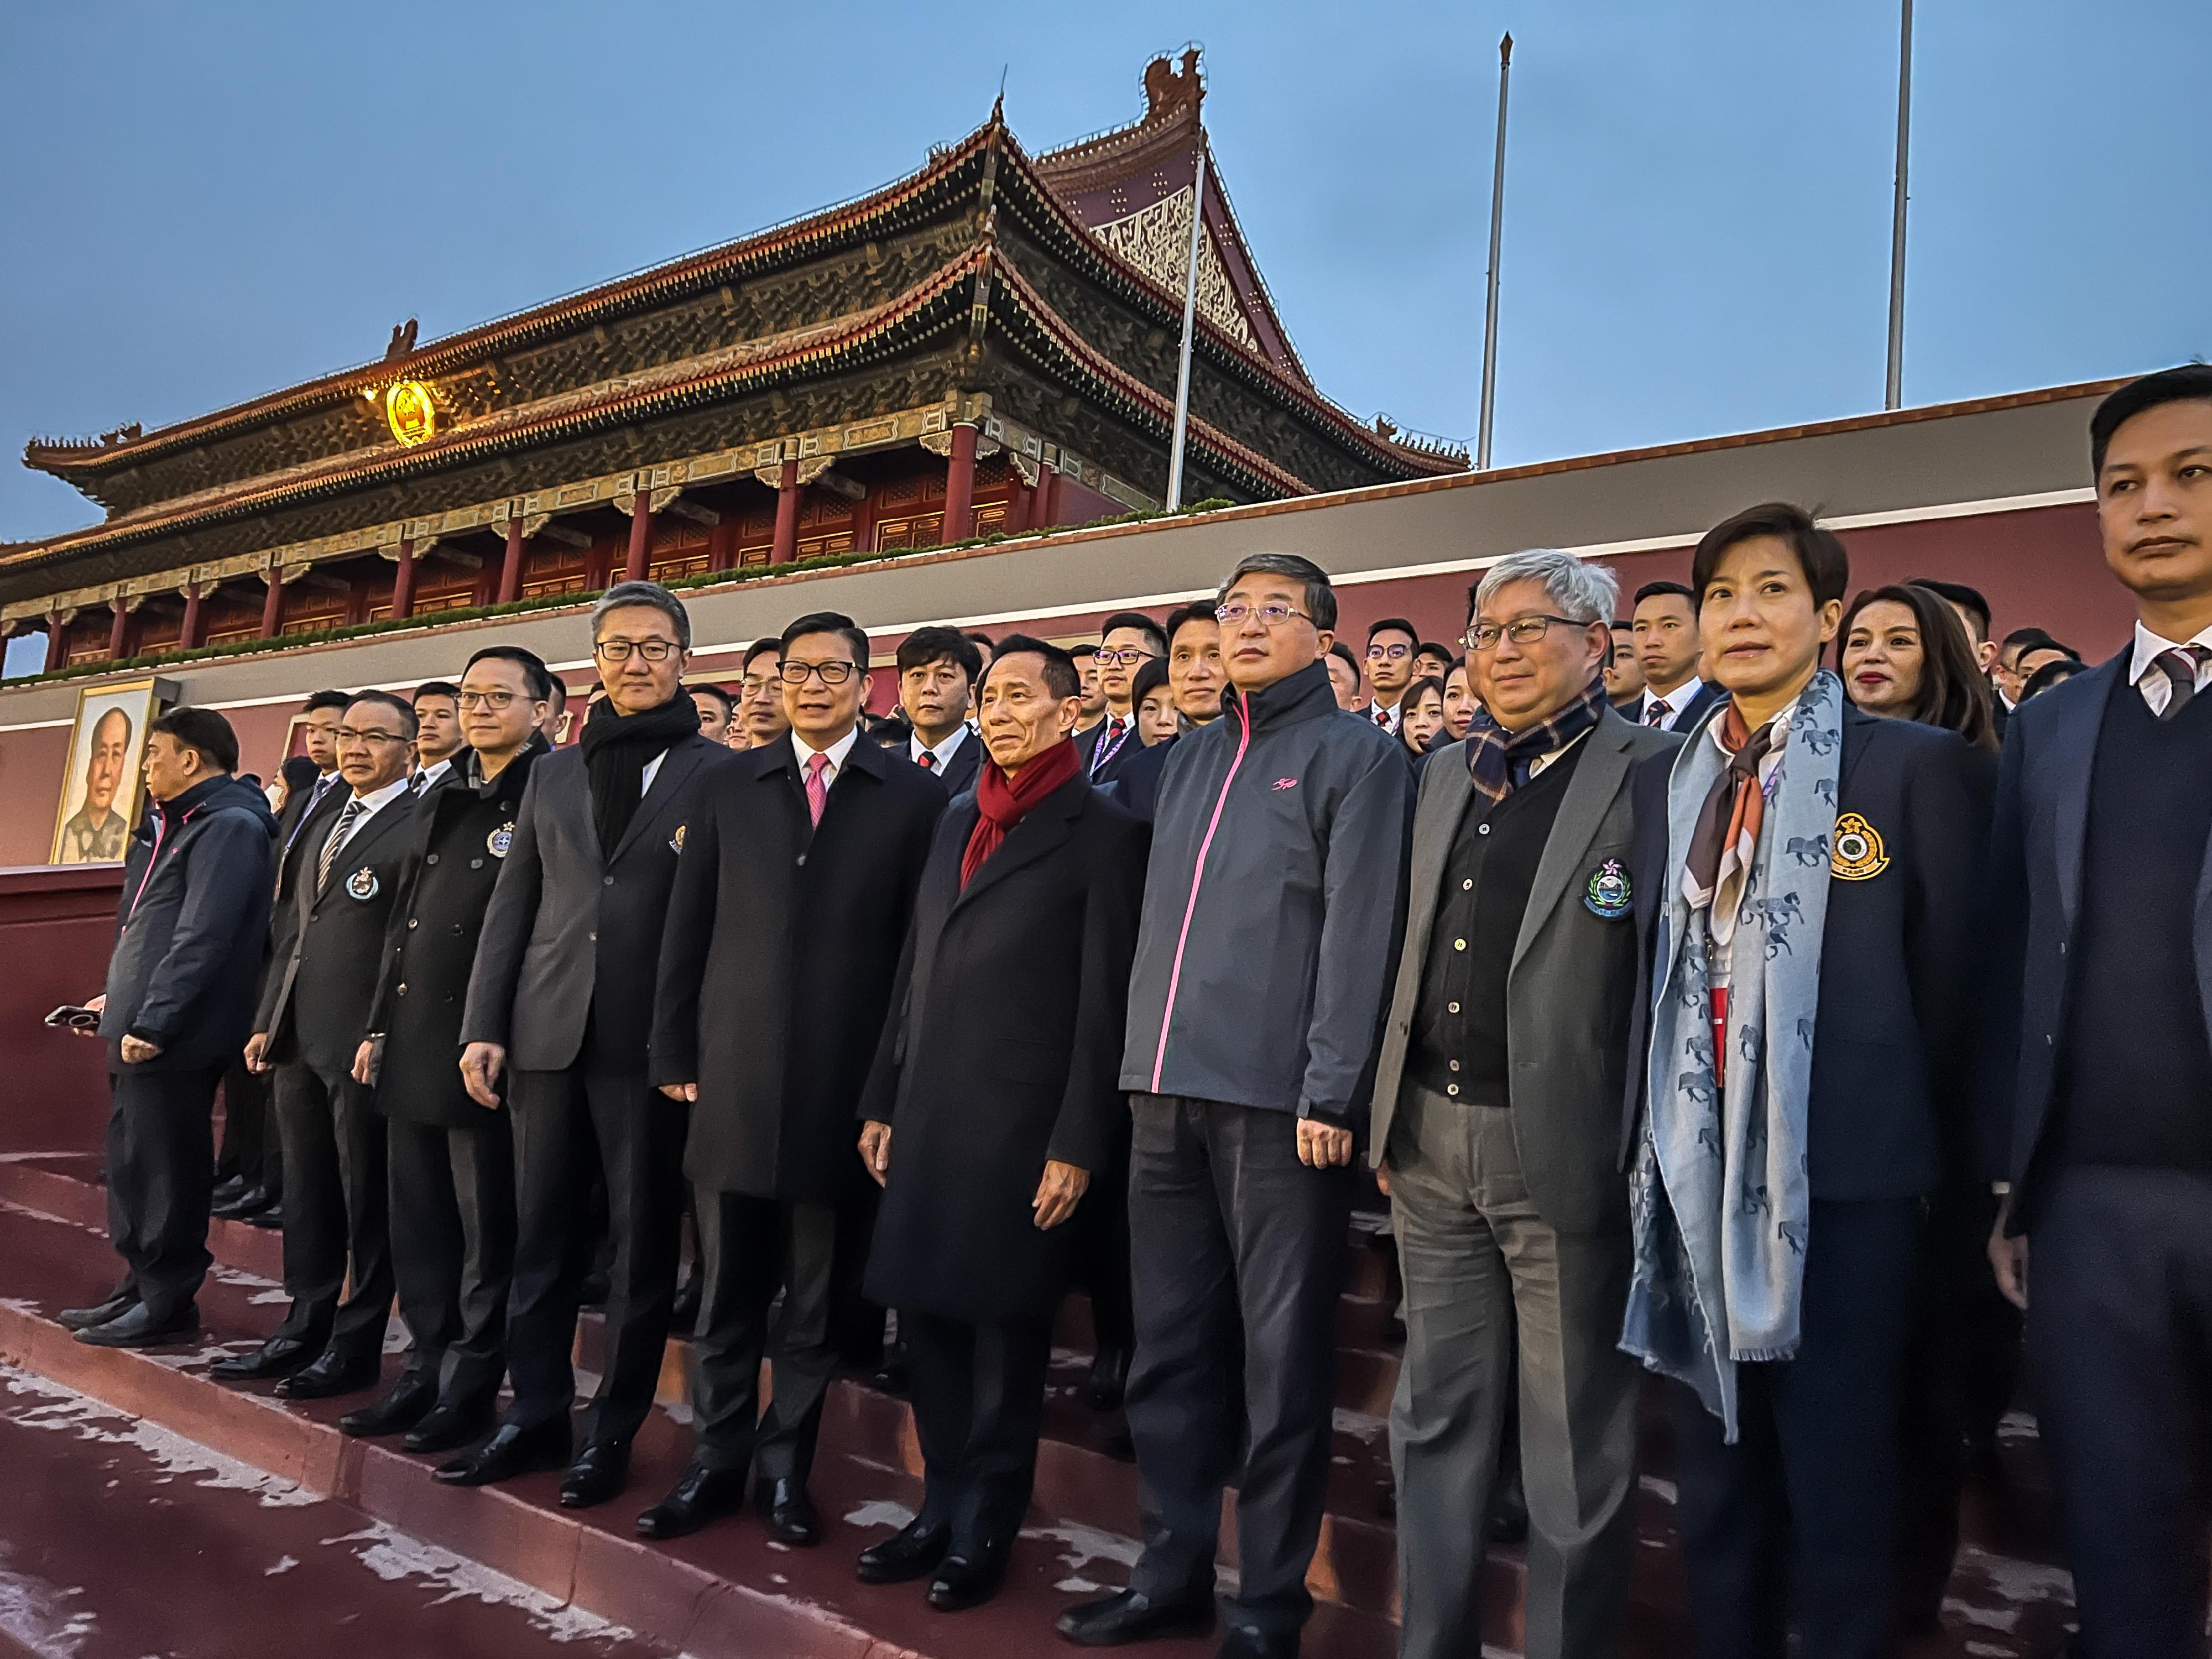 The Secretary for Security, Mr Tang Ping-keung, continued the second day of his visit to Beijing today (April 25). Photo shows Mr Tang (front row, fifth left), together with the heads of disciplined services departments and the Hong Kong Disciplined Services Cultural Exchange Delegation which is currently on an exchange visit on the Mainland, watching the flag-raising ceremony at Tiananmen Square in the early morning.